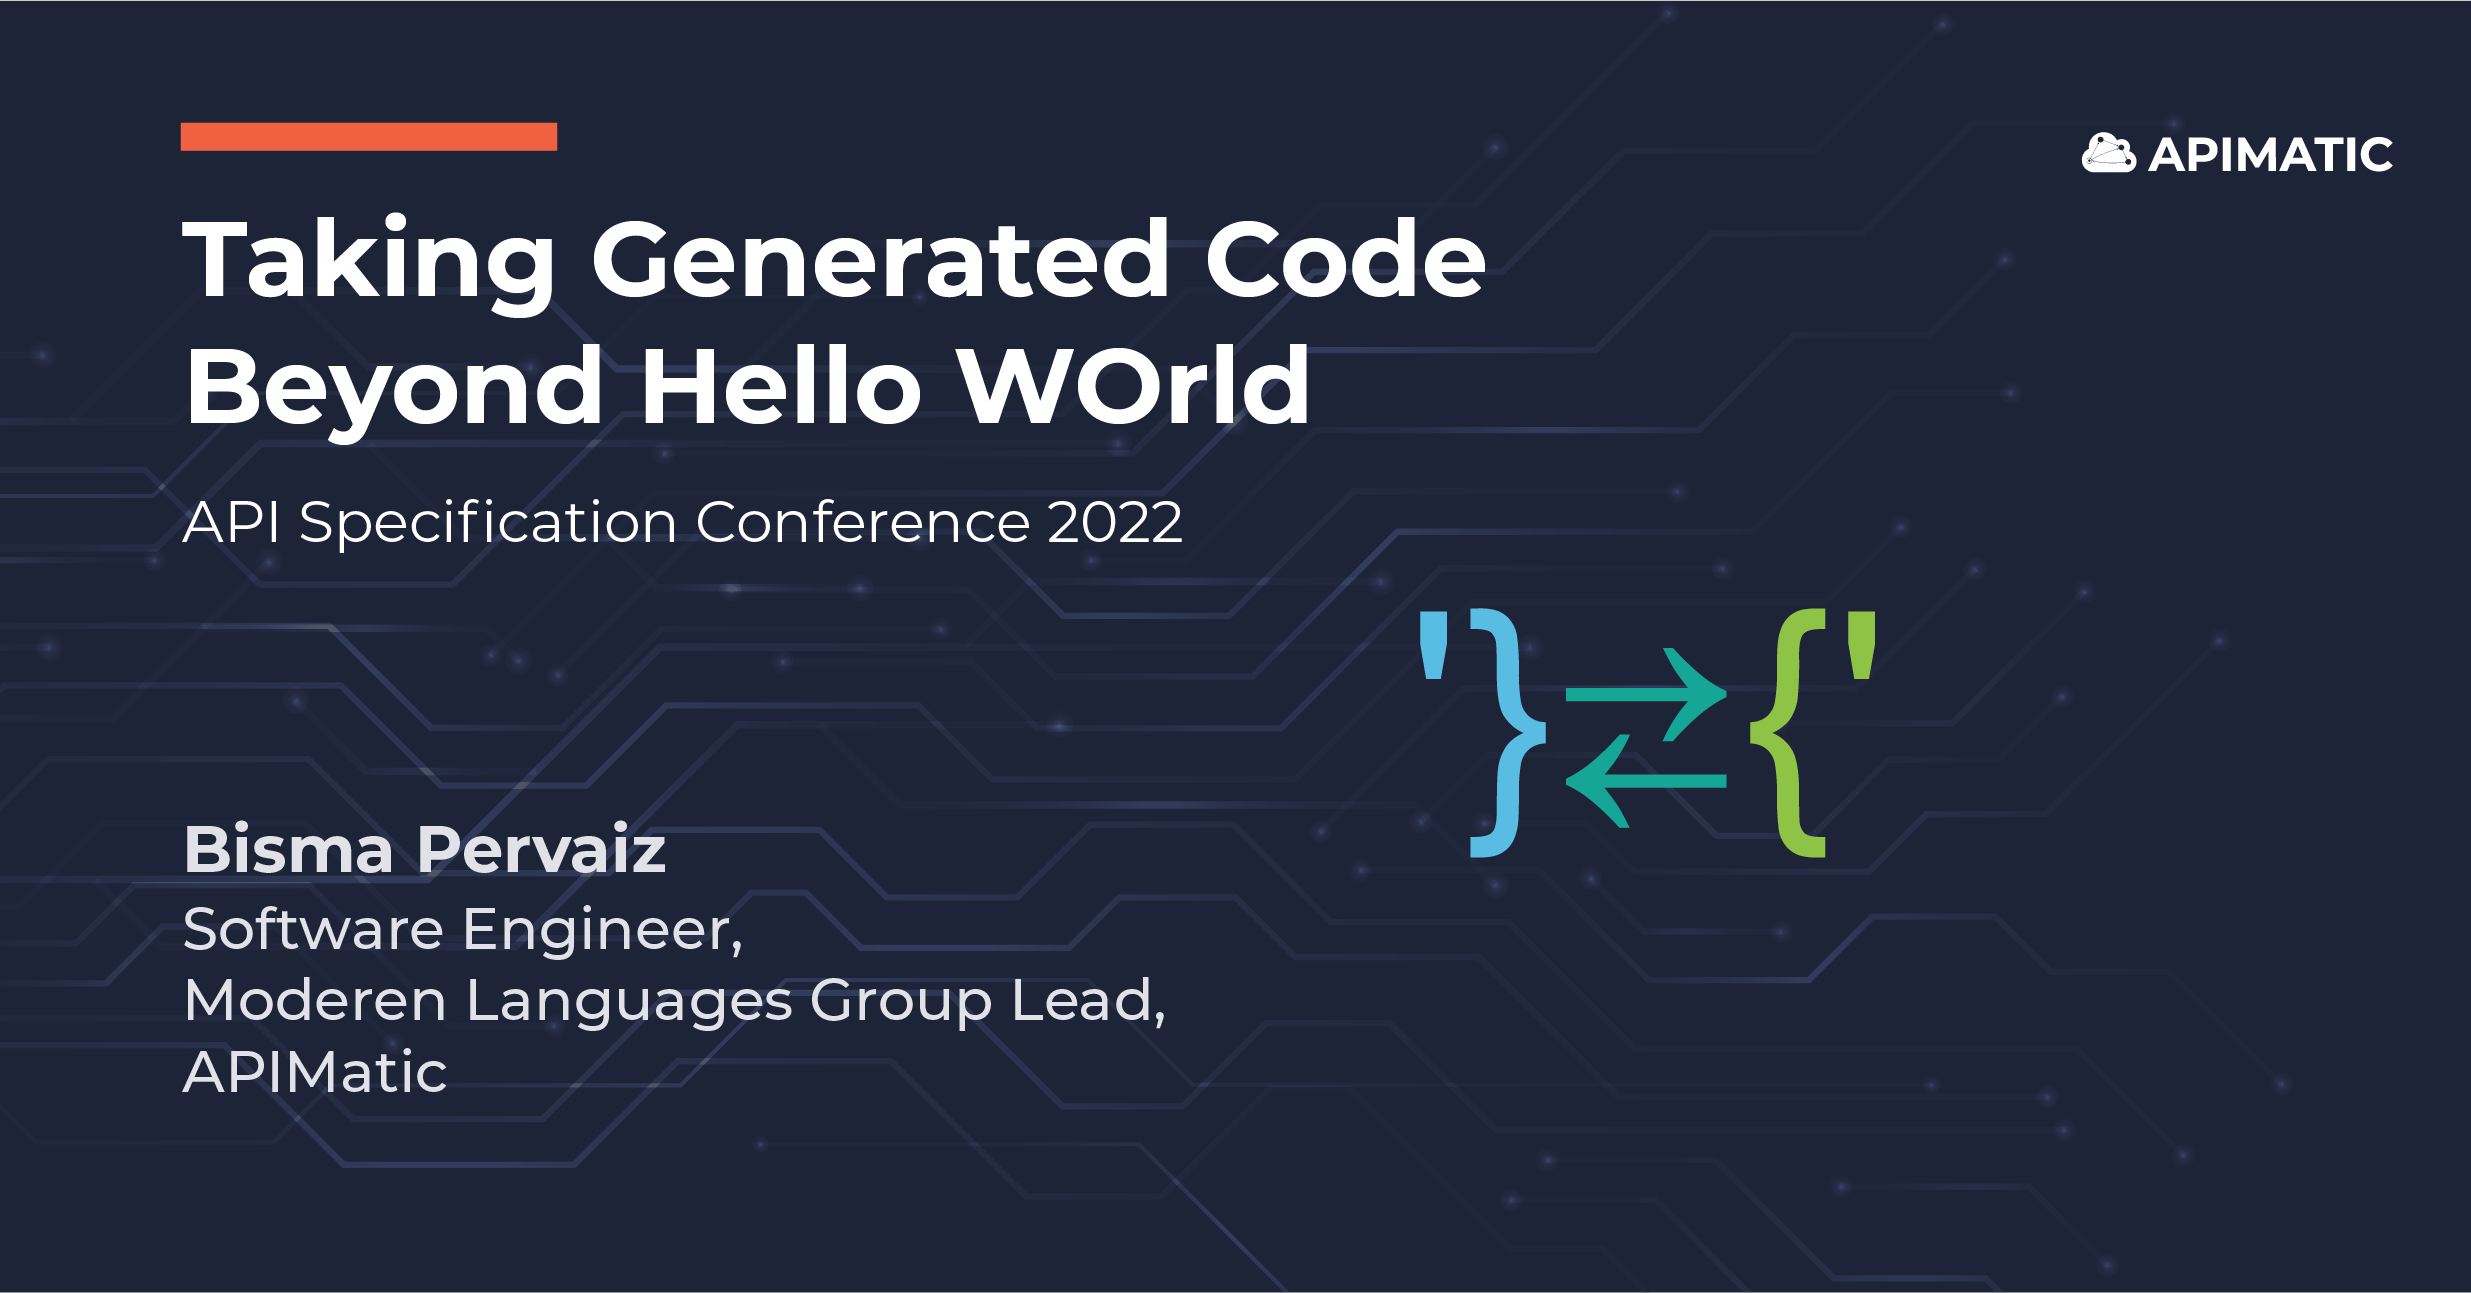 Conference on how to take generated code beyond 